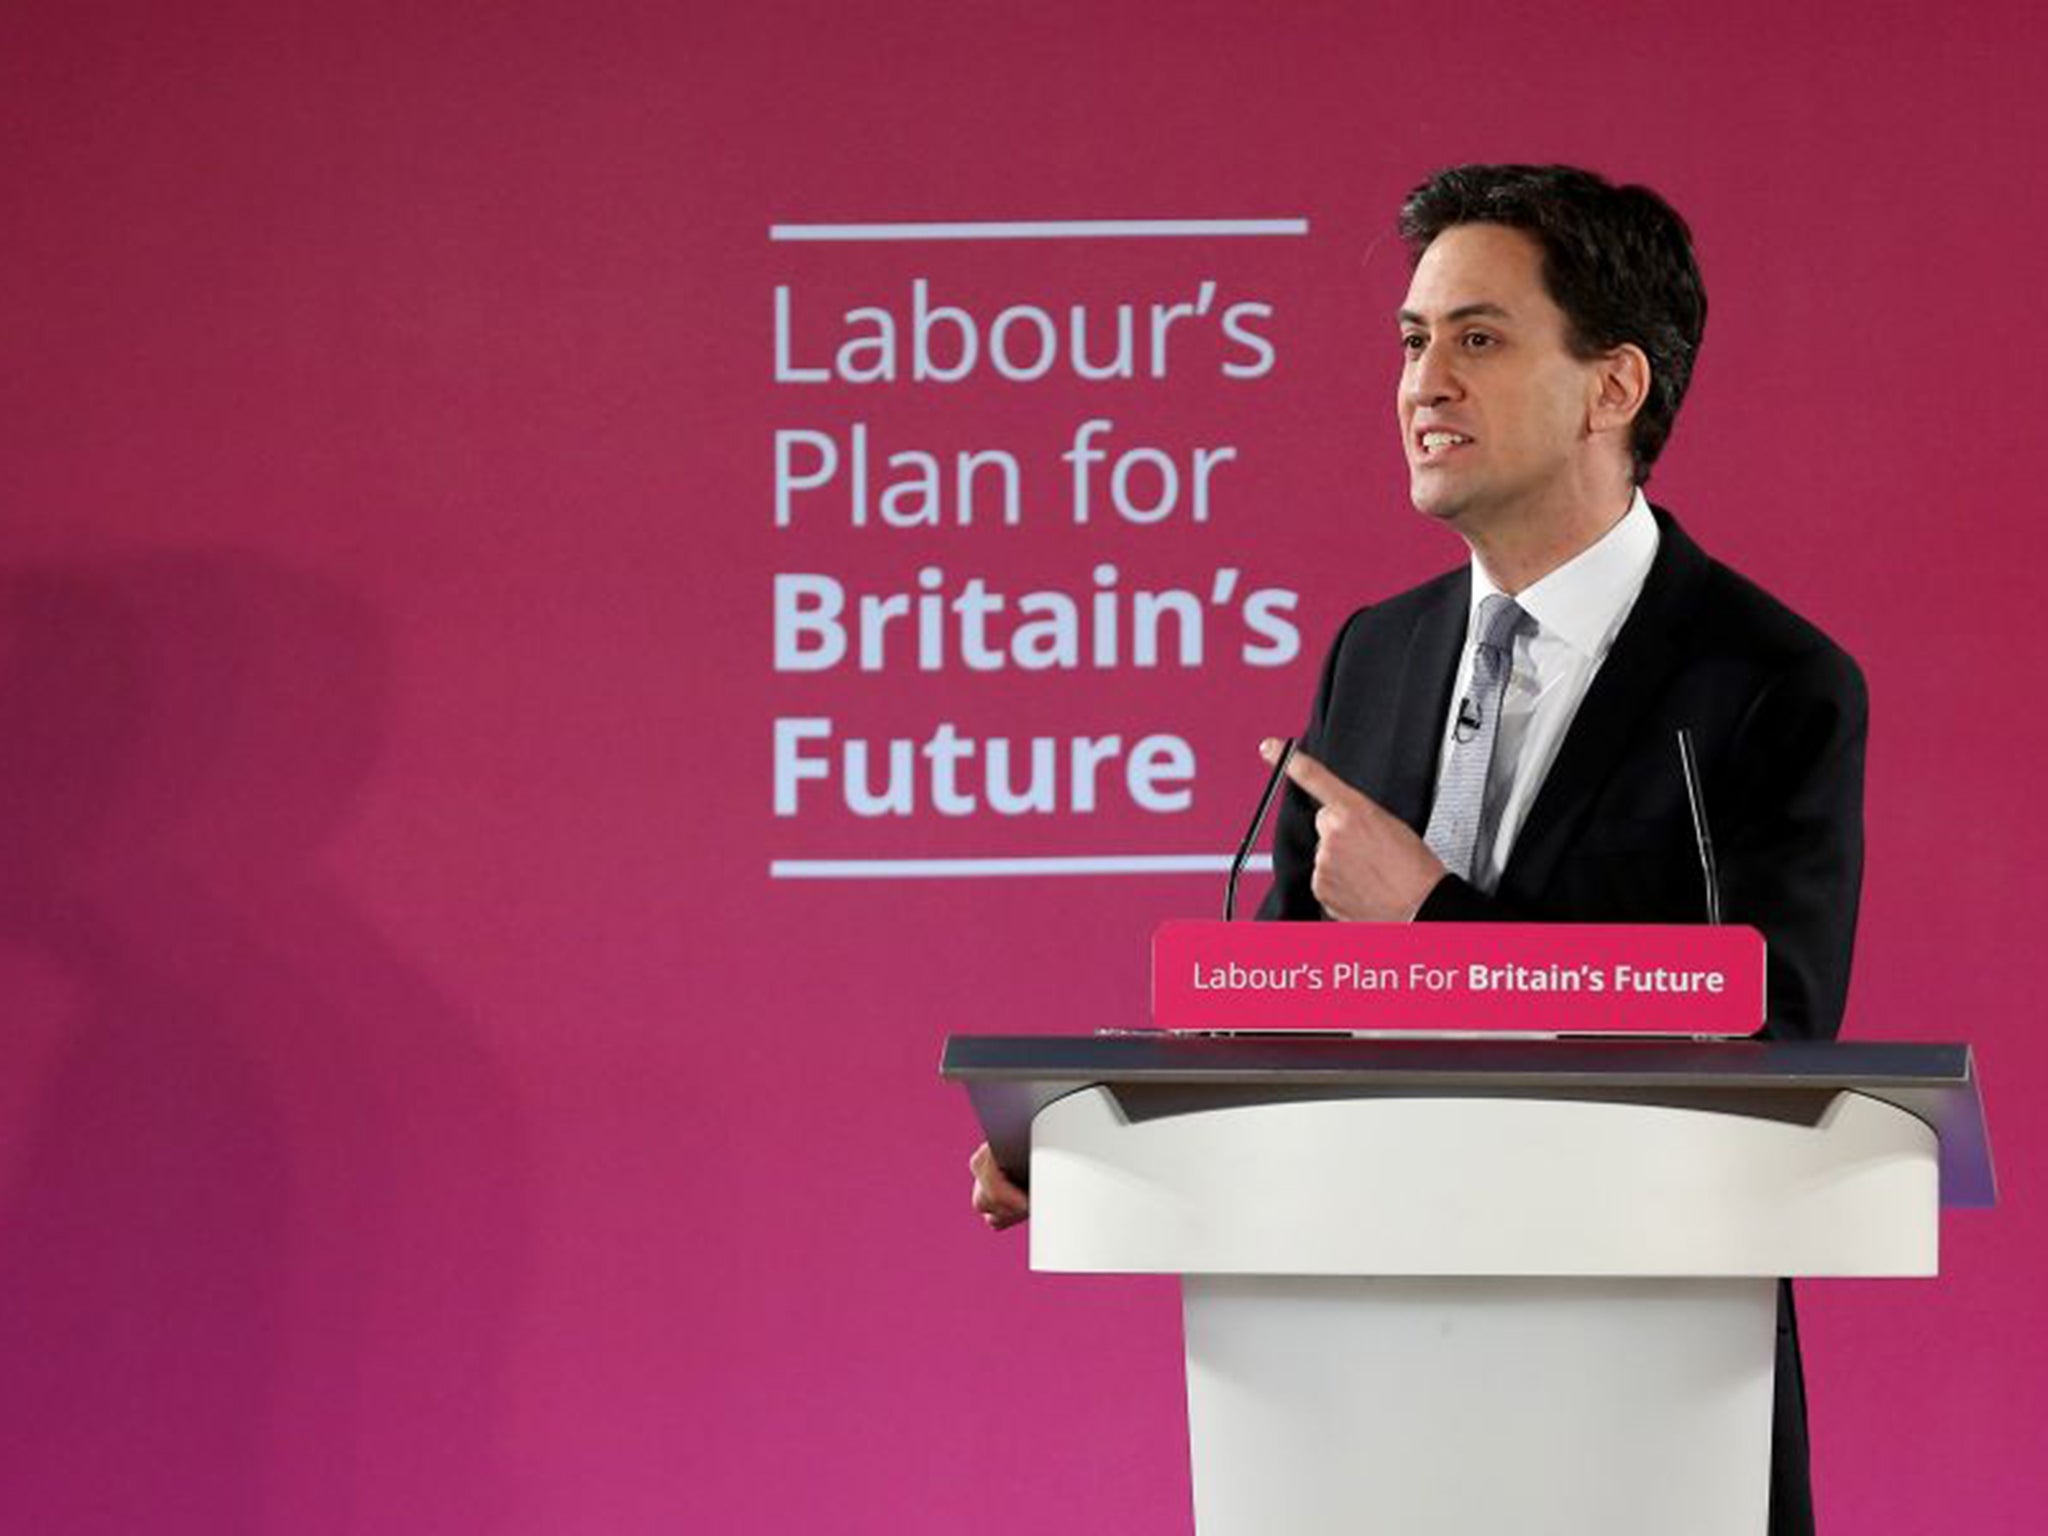 Labour party leader Ed Miliband addressed party activists as he launched the party’s 2015 election campaign at the Lowry Centre on Monday